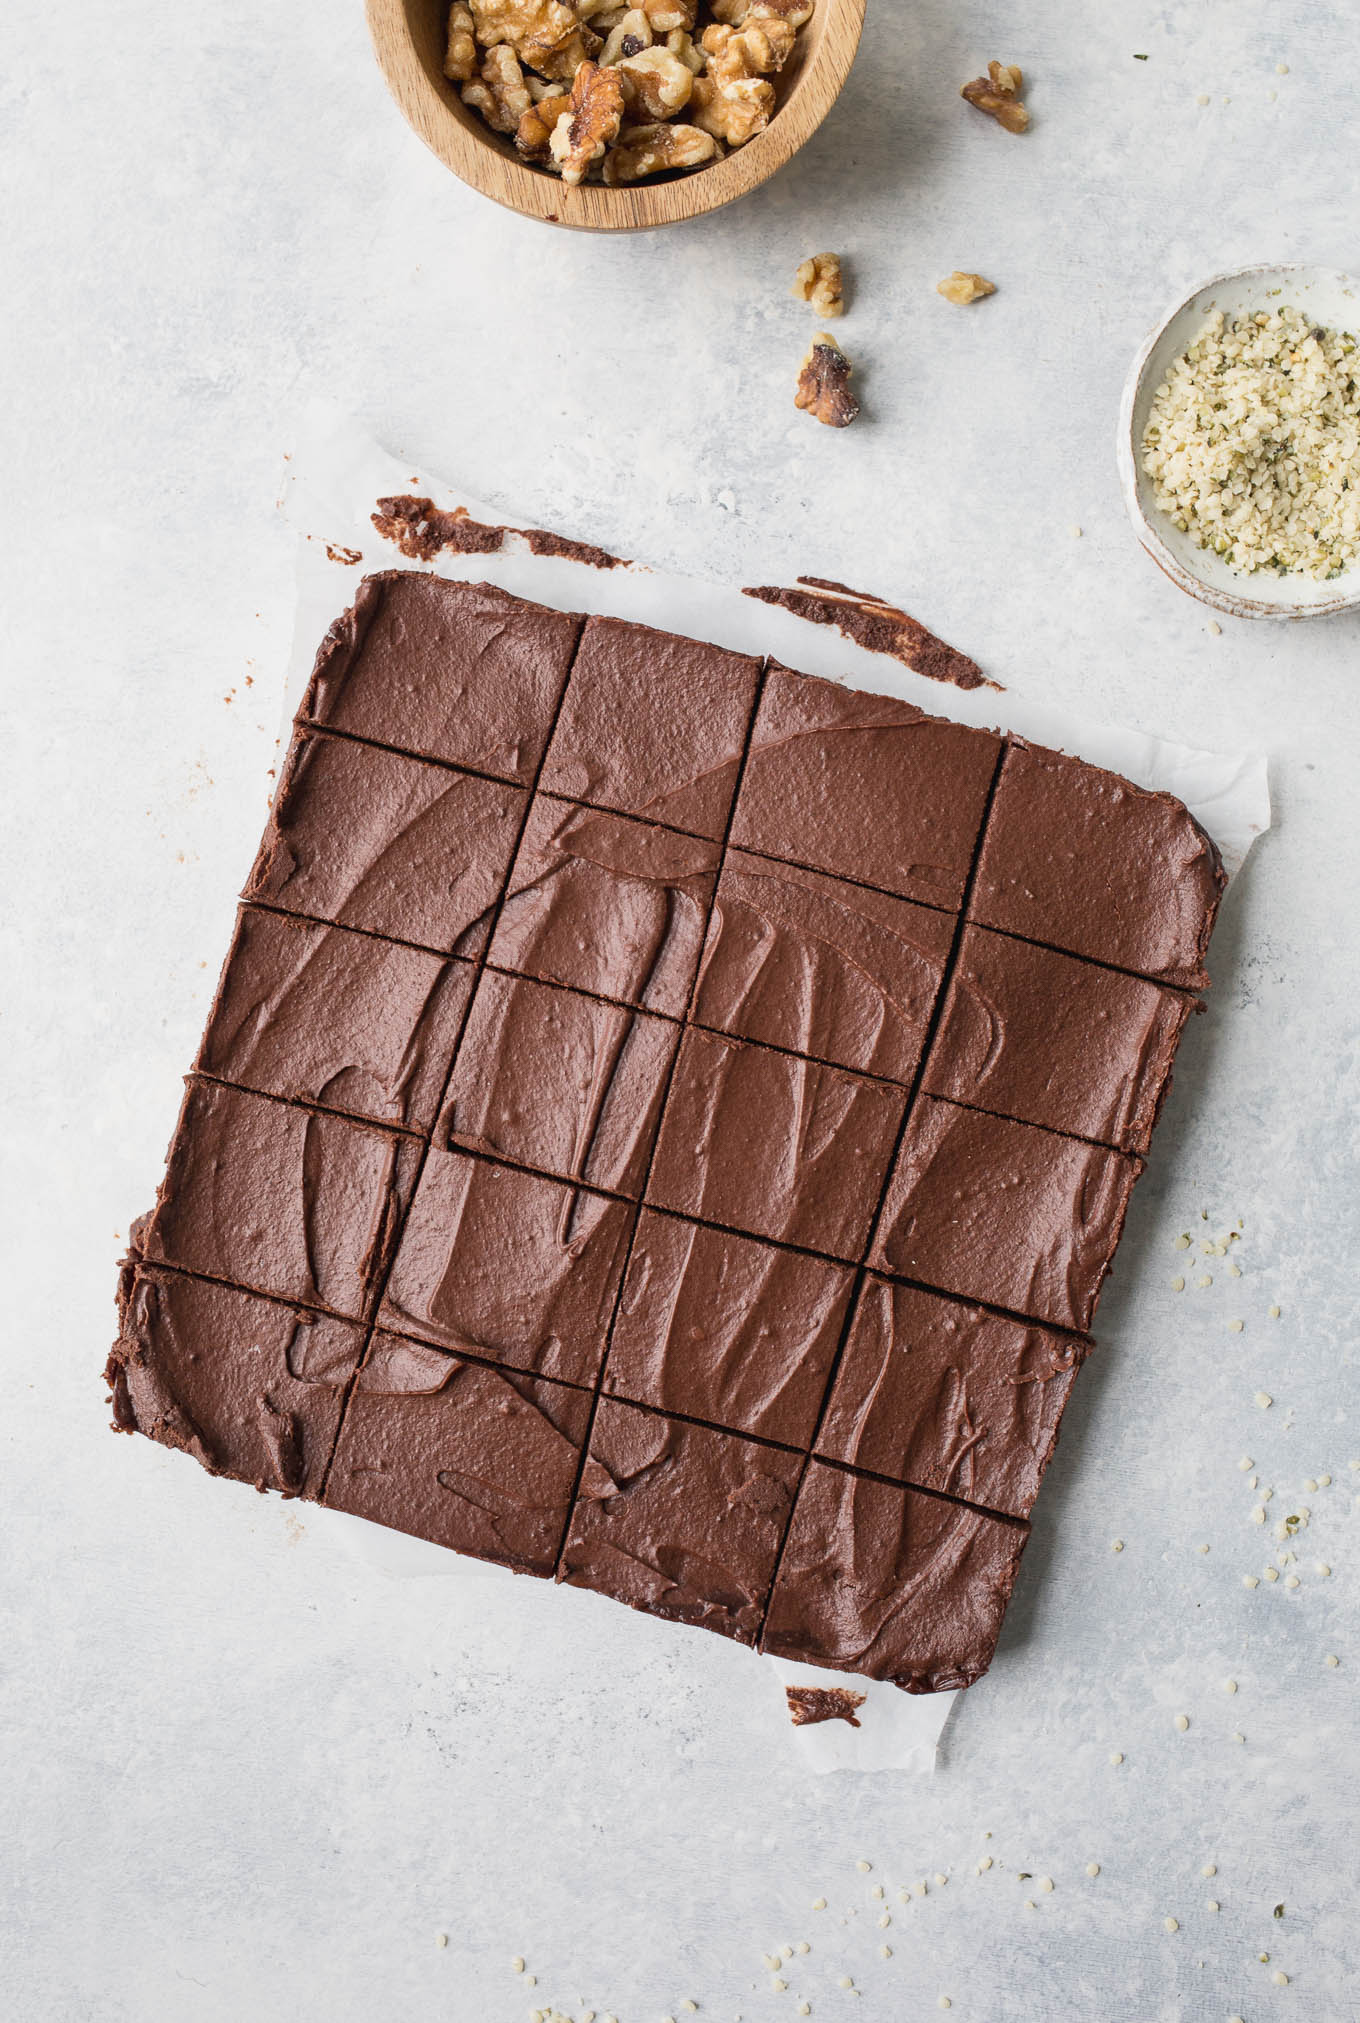 No-bake, raw chocolate brownies made with a layer of hemp seeds, walnuts, cocoa, and dates, topped with a delicious chocolate ganache frosting. Gluten-free, vegan, and refined sugar-free. 